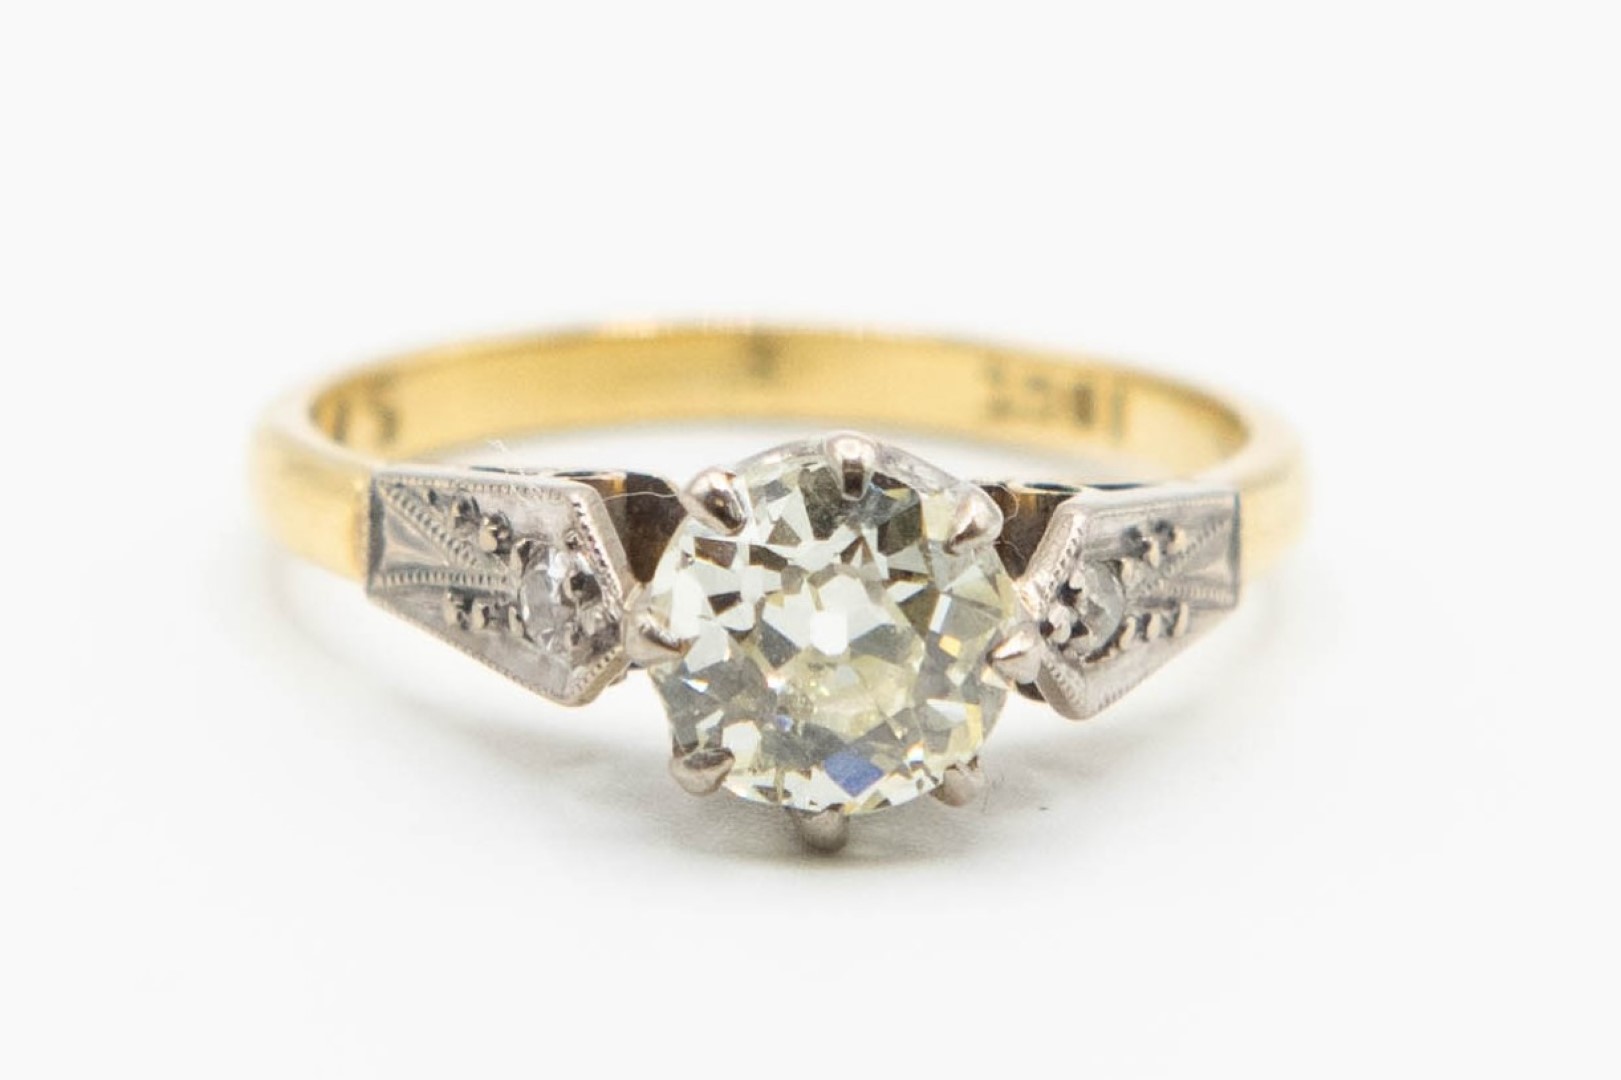 AN ART DECO 18CT YELLOW GOLD AND DIAMOND RING